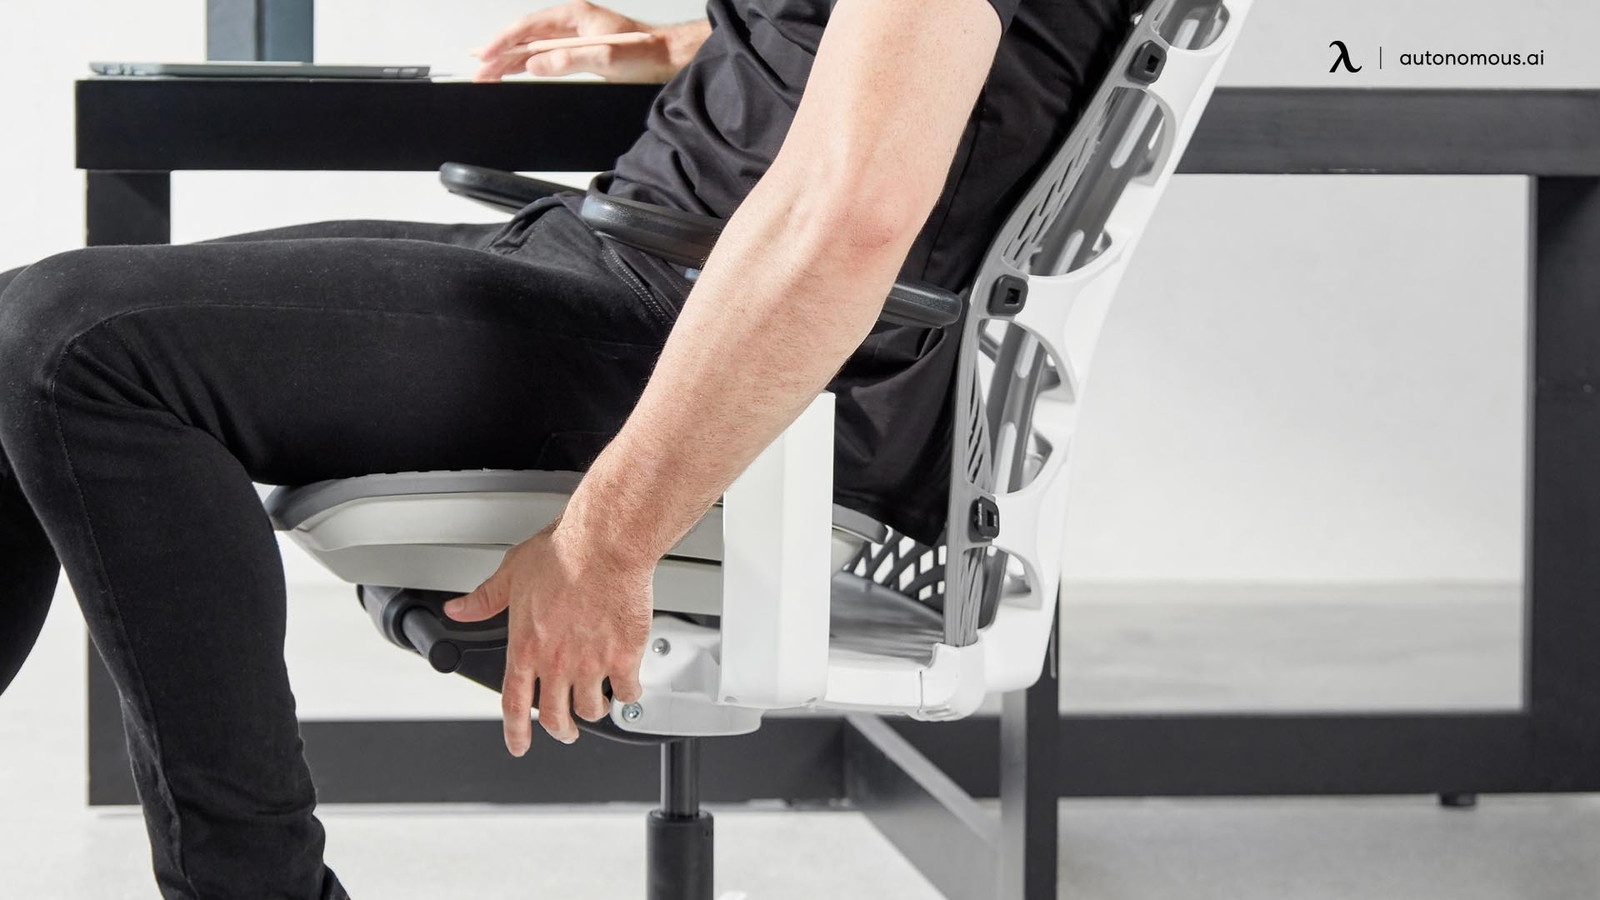 Lighten Up Your Home Office with a White Ergonomic Office Chair